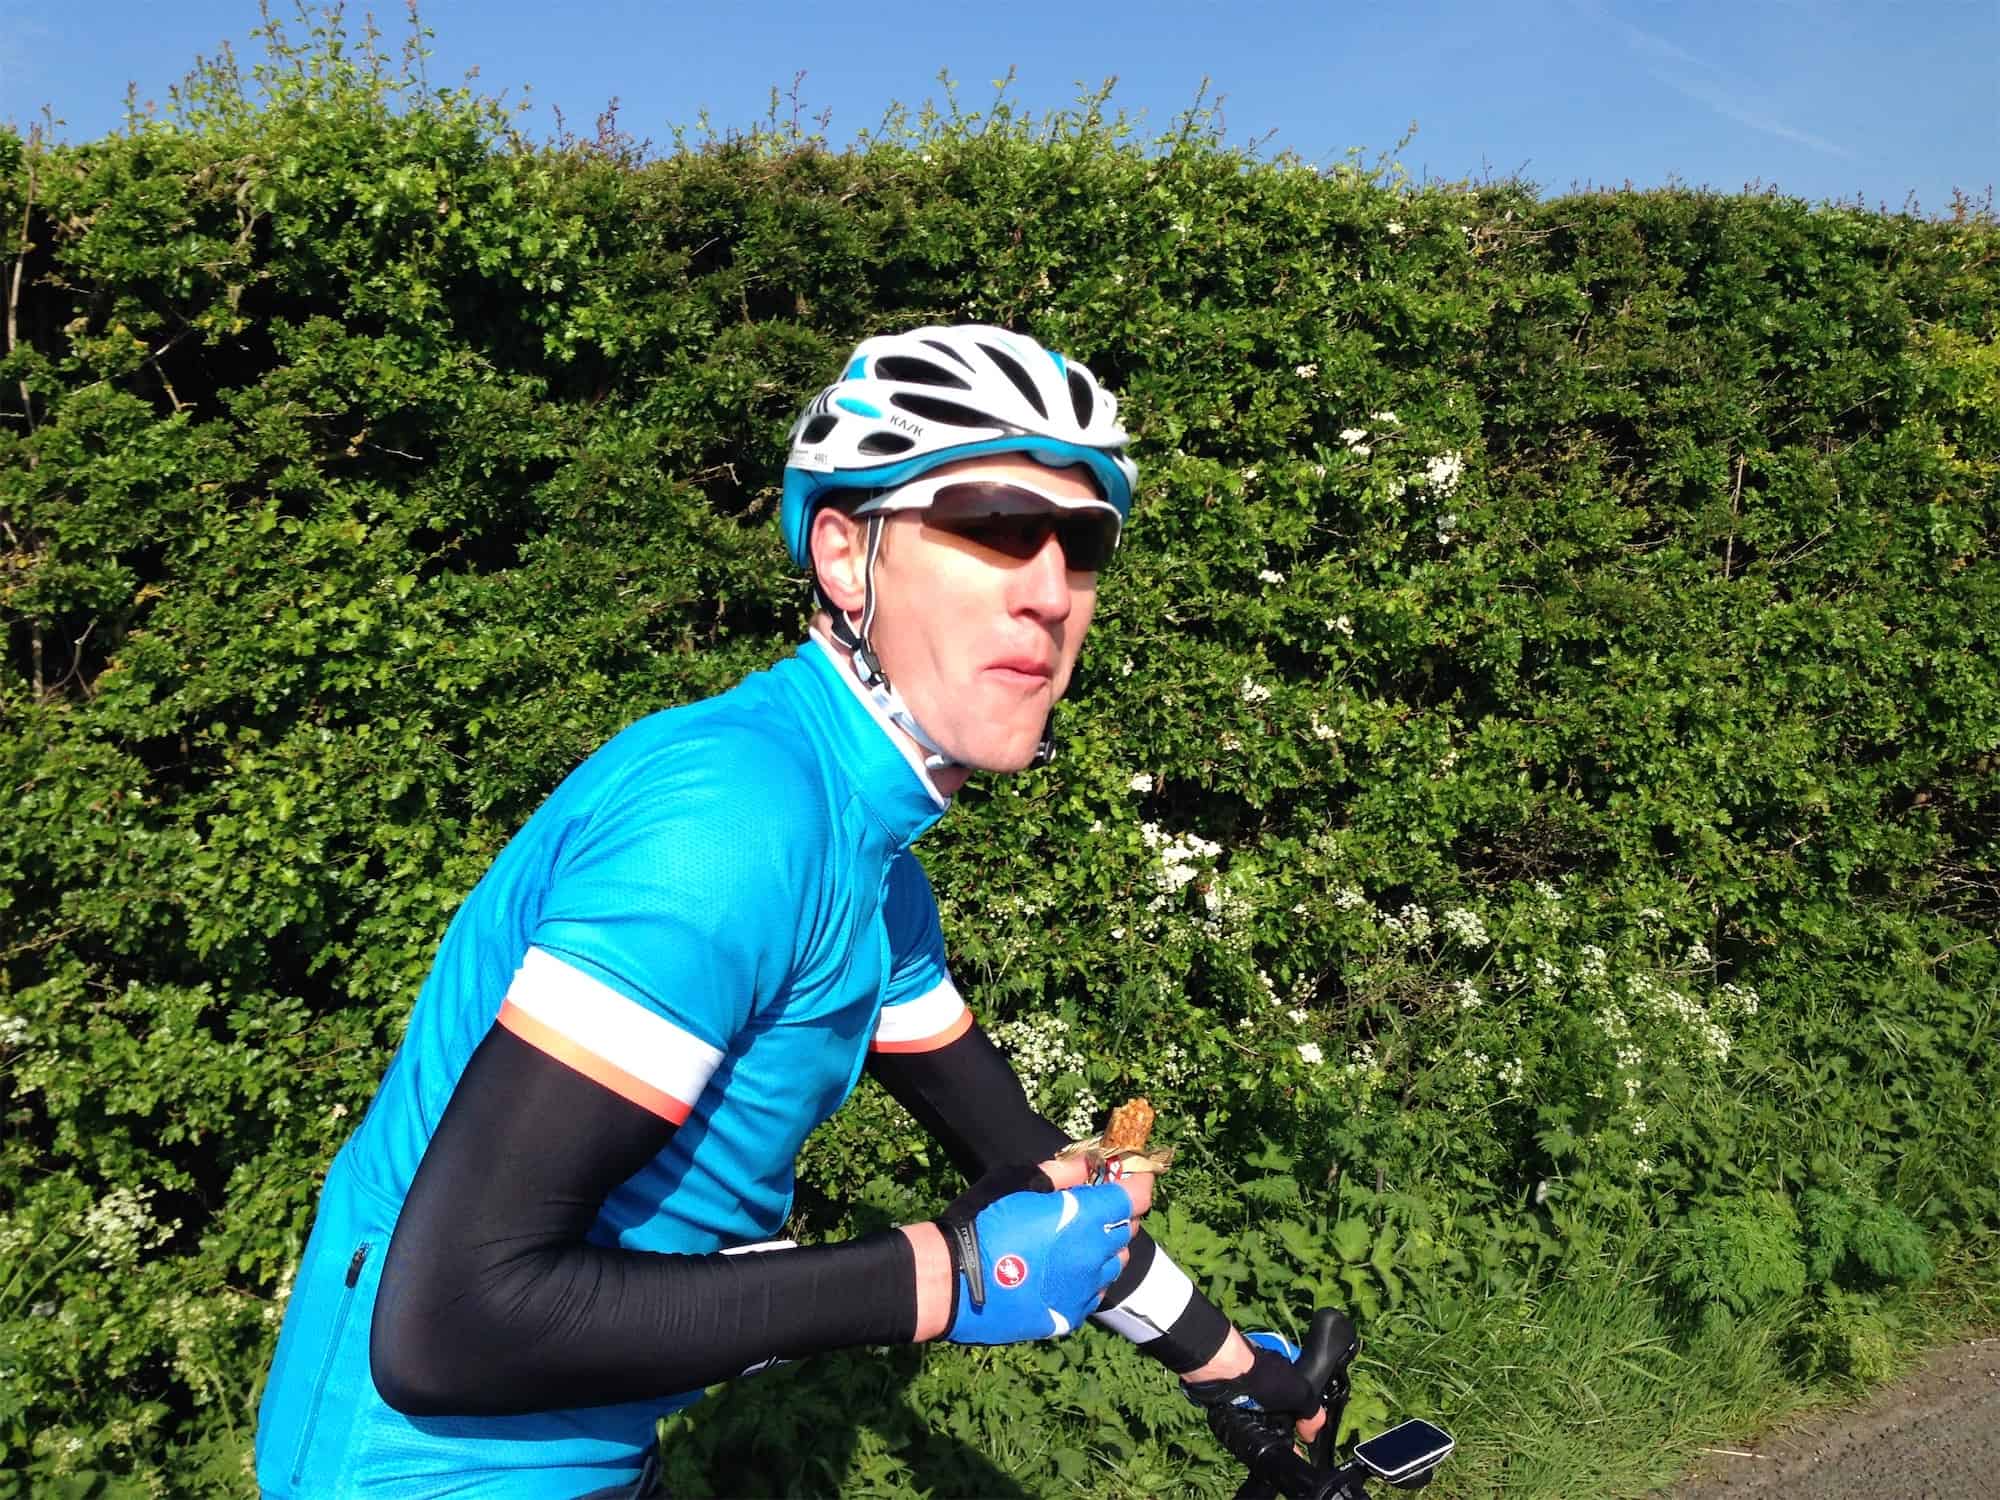 cyclist snacking on energy bar during a ride